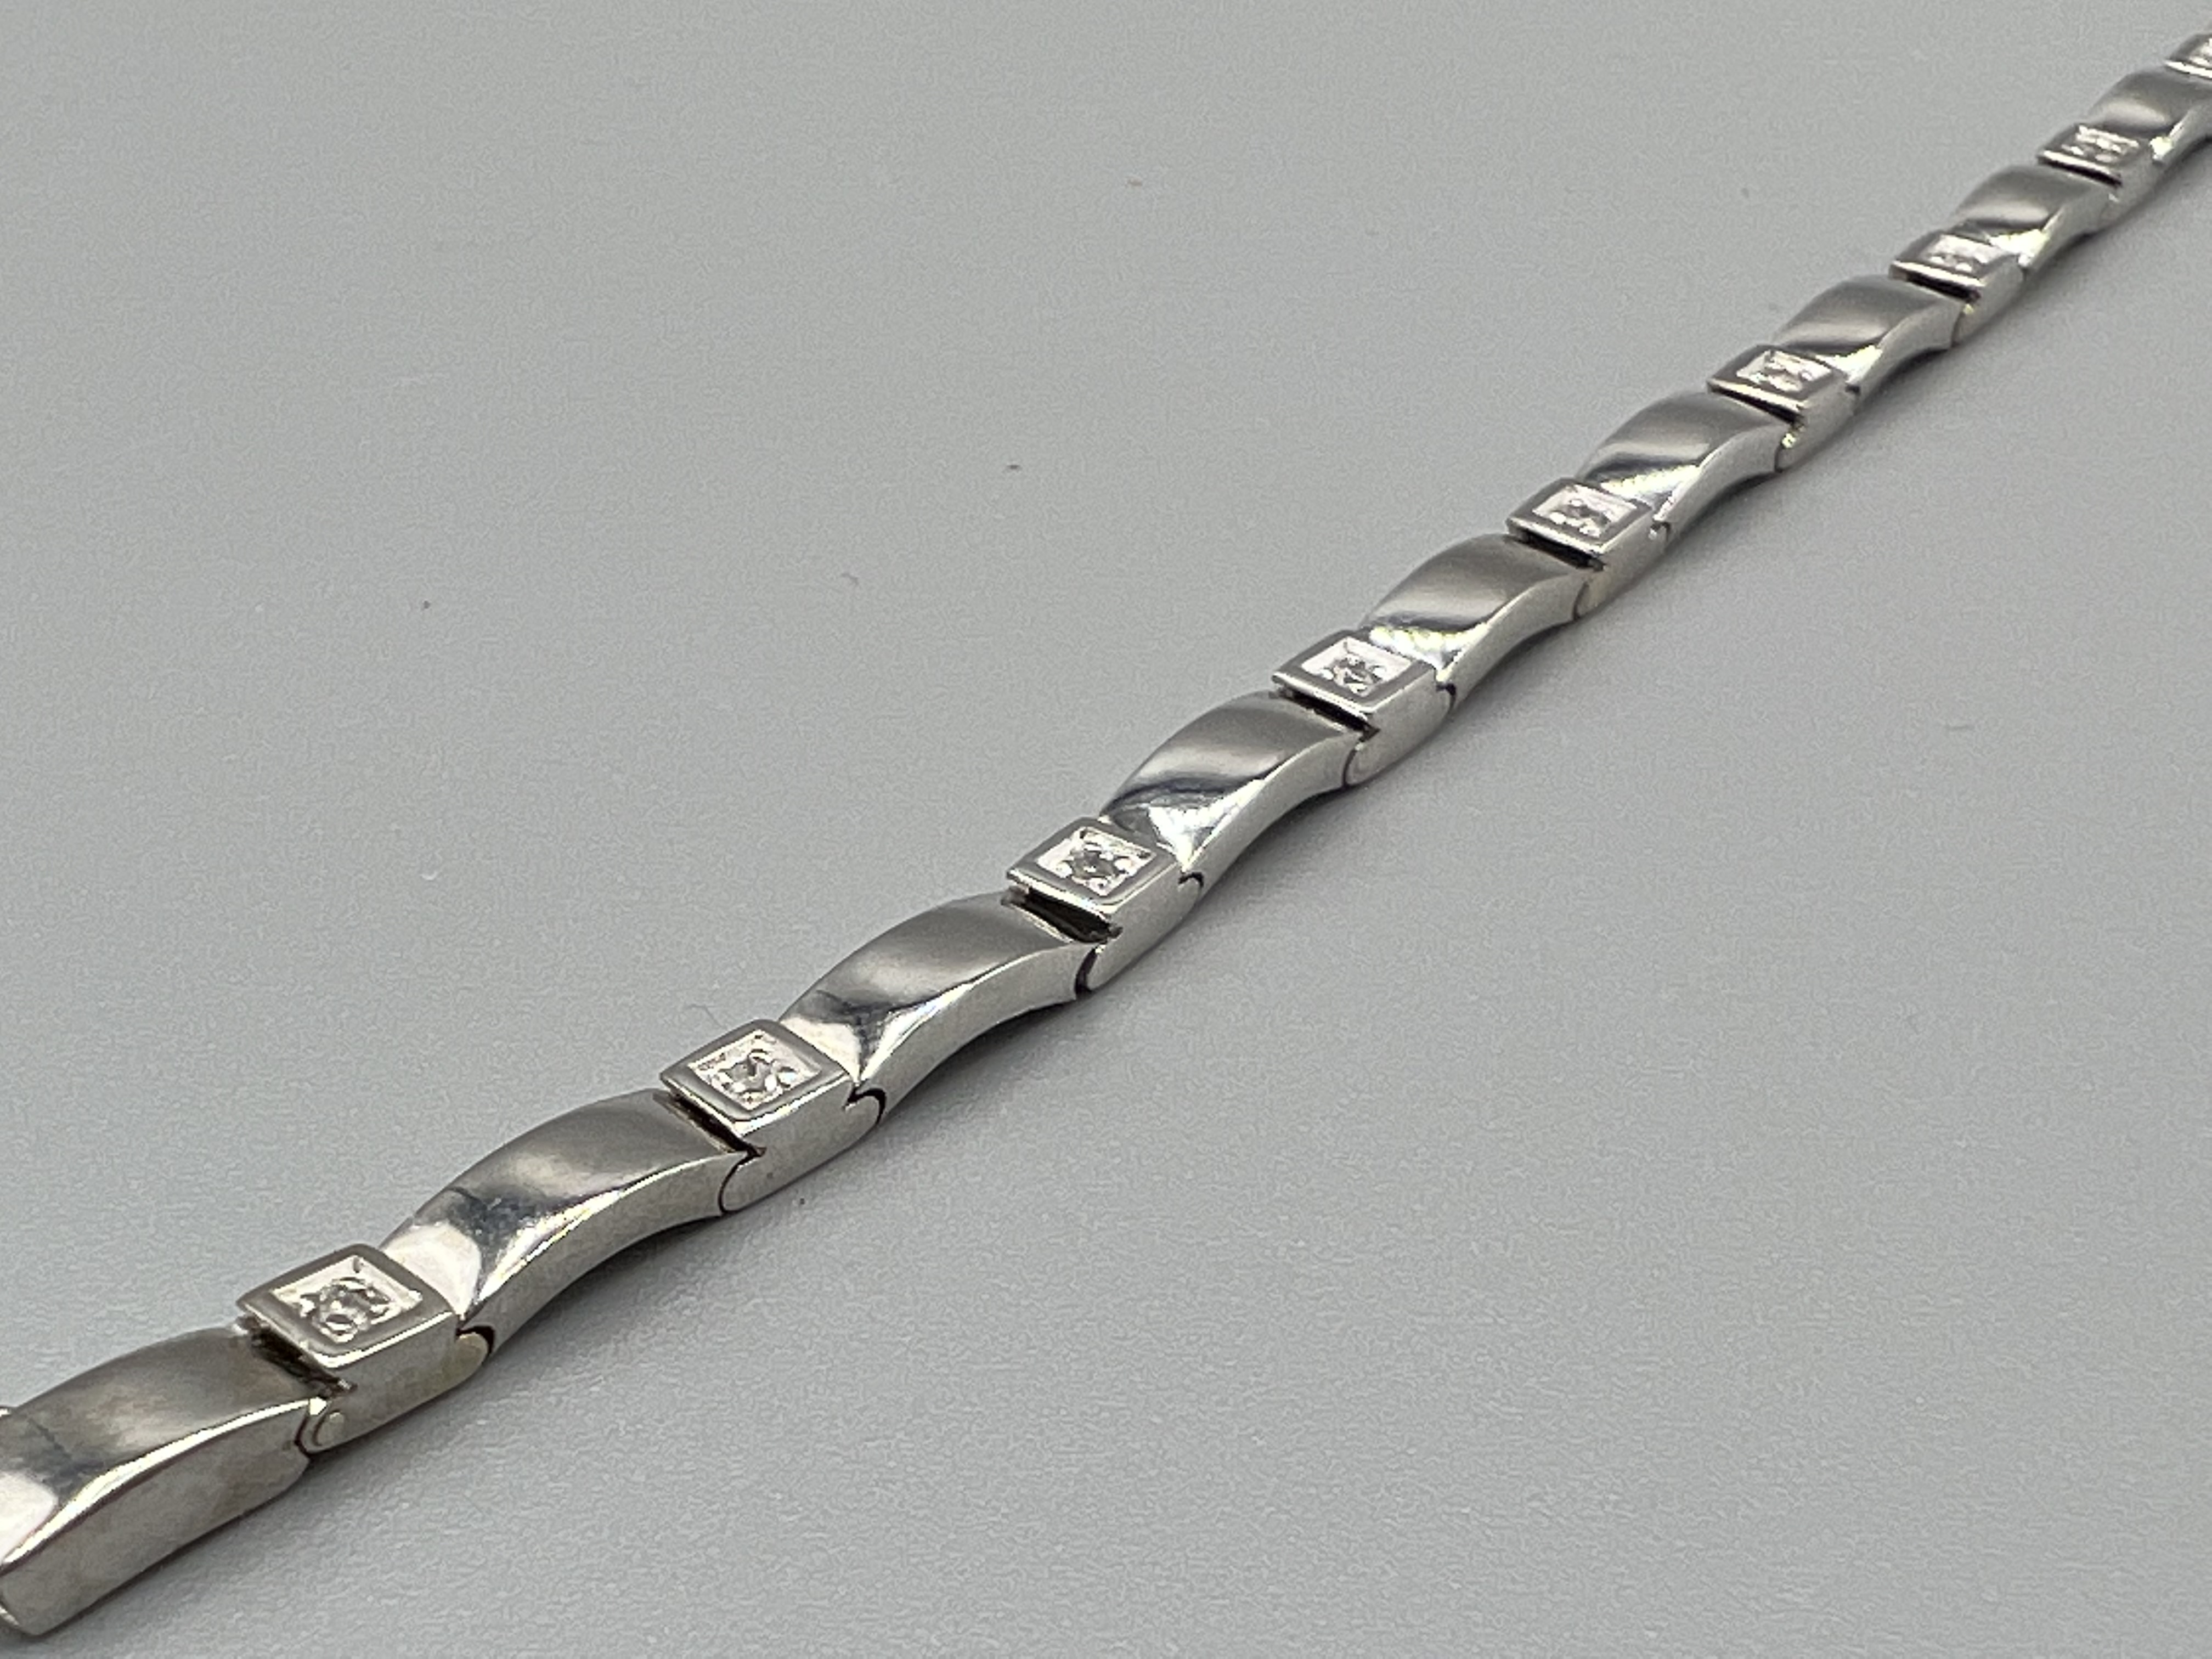 9ct White Gold & Diamond Bracelet 18cm in length - Very Good Condition 8.2 grams - Image 2 of 2